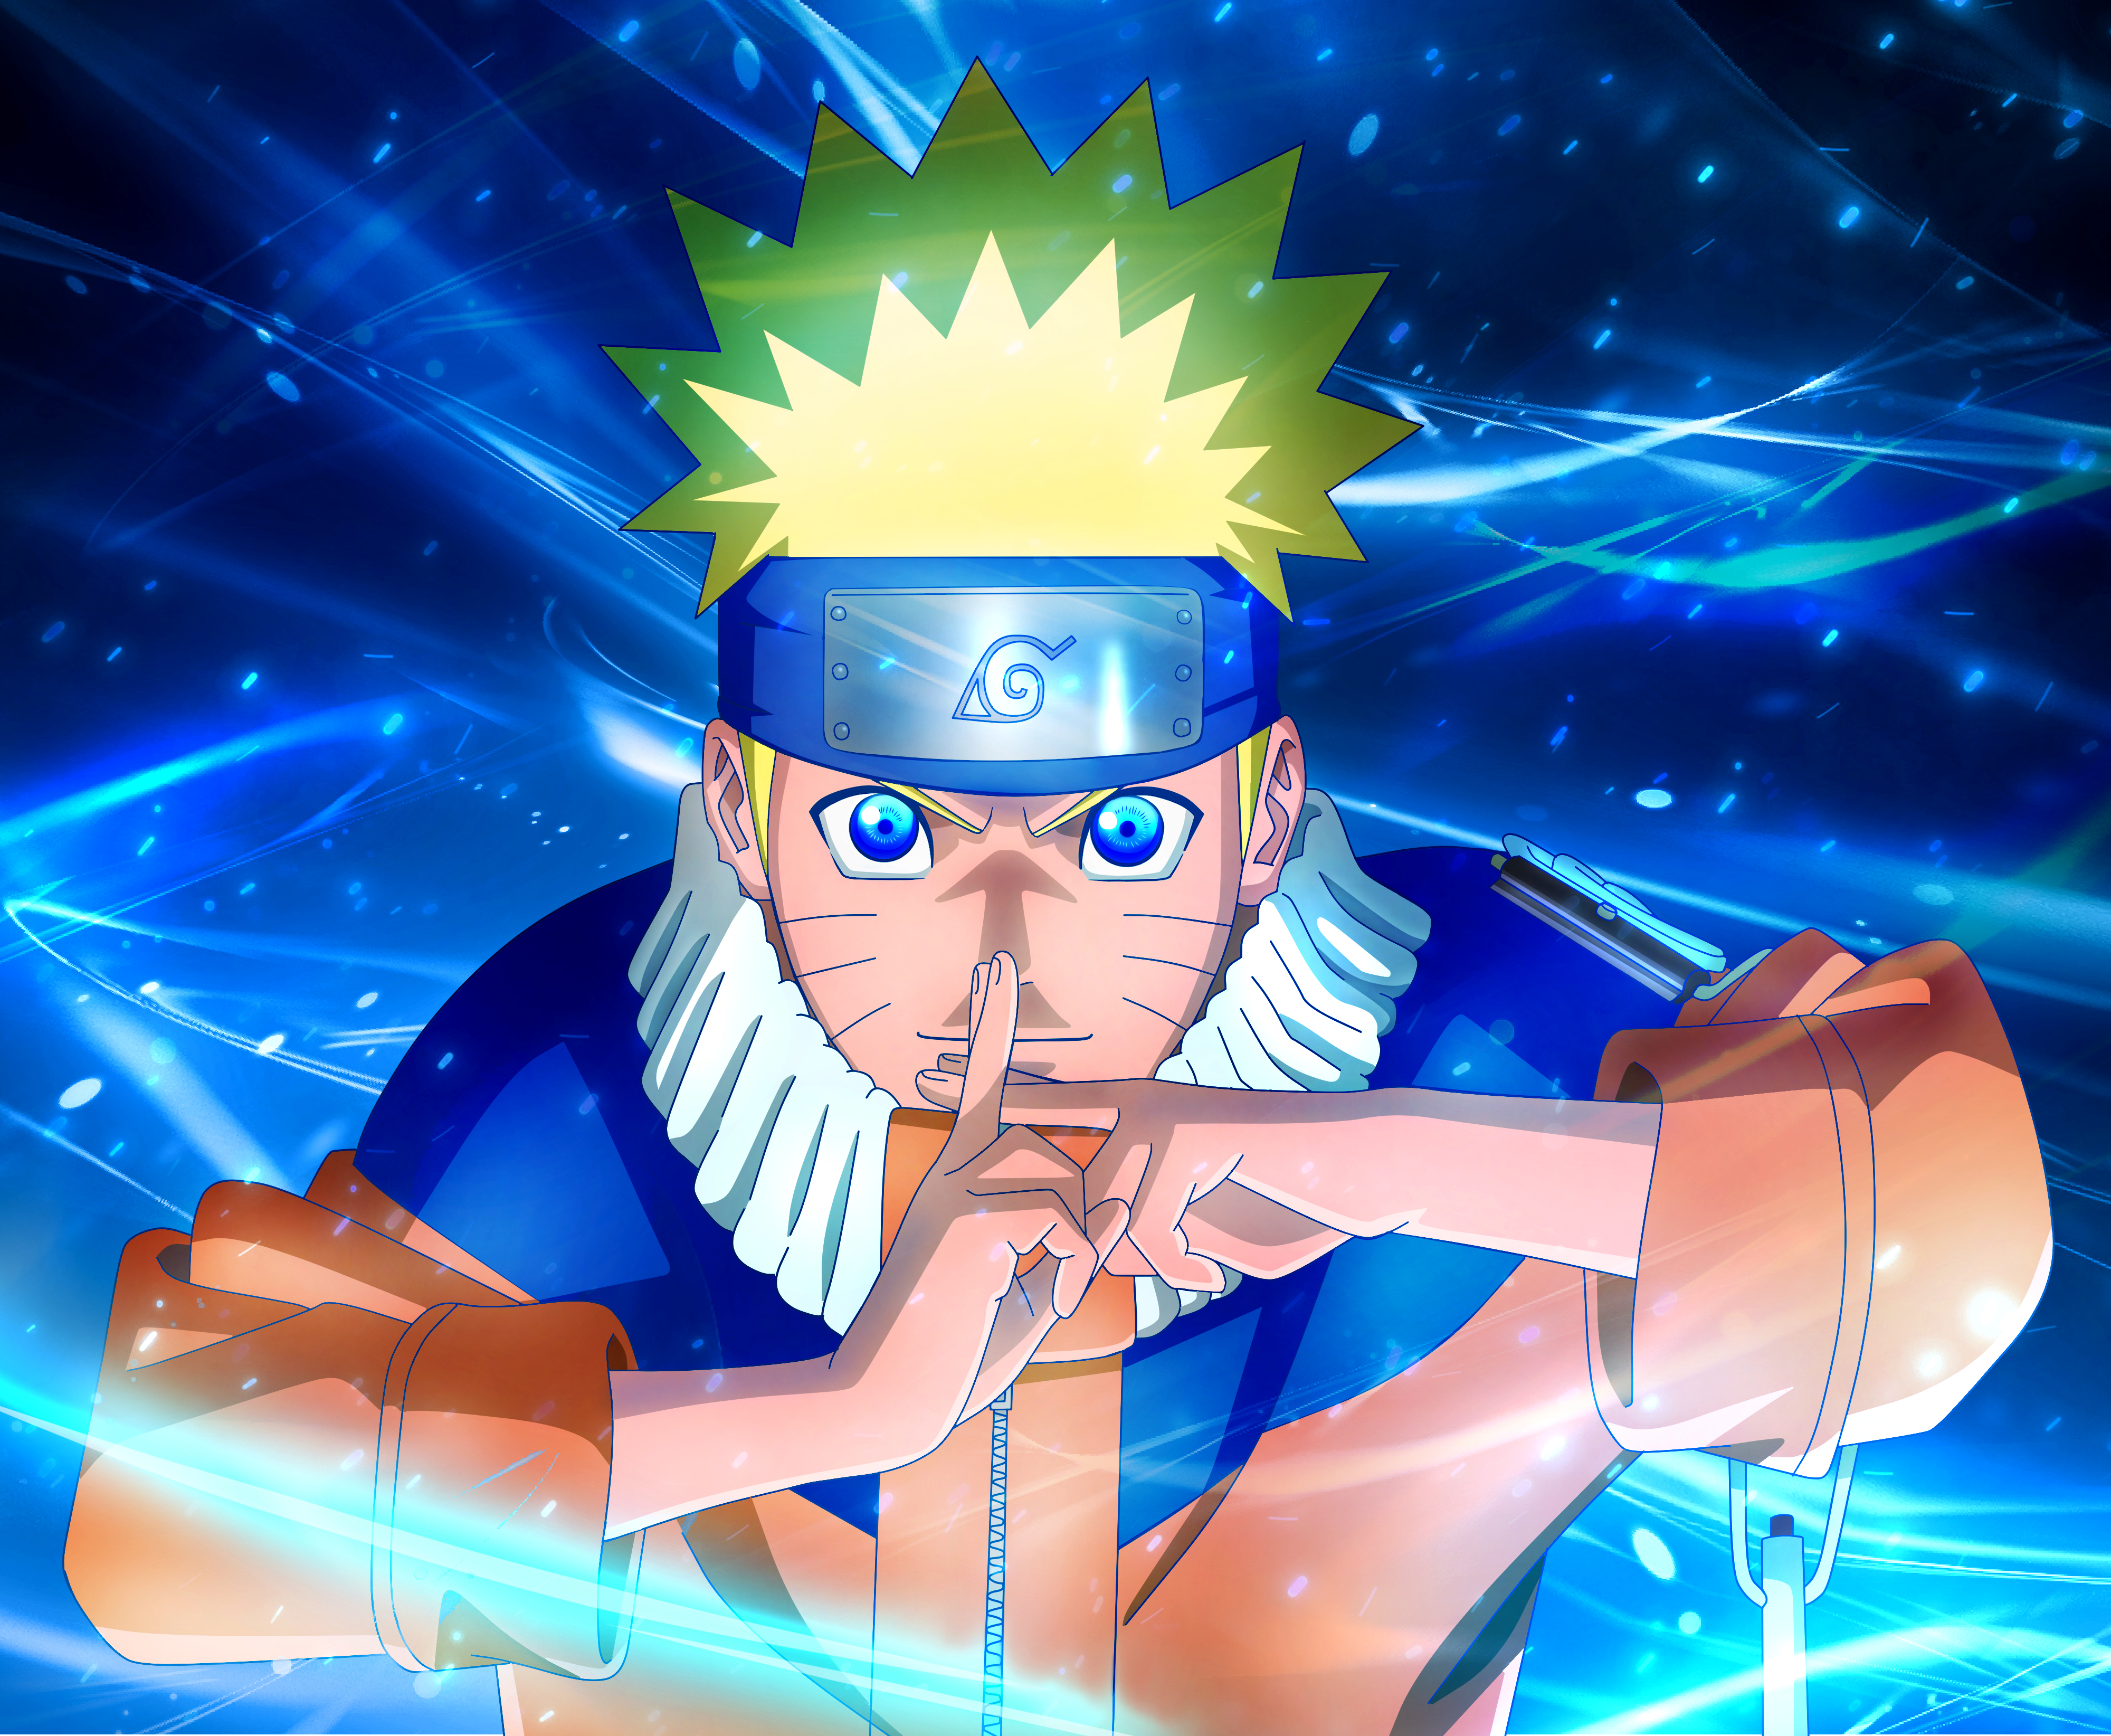 Anime Naruto 4k Ultra HD Wallpaper by DT501061 余佳軒